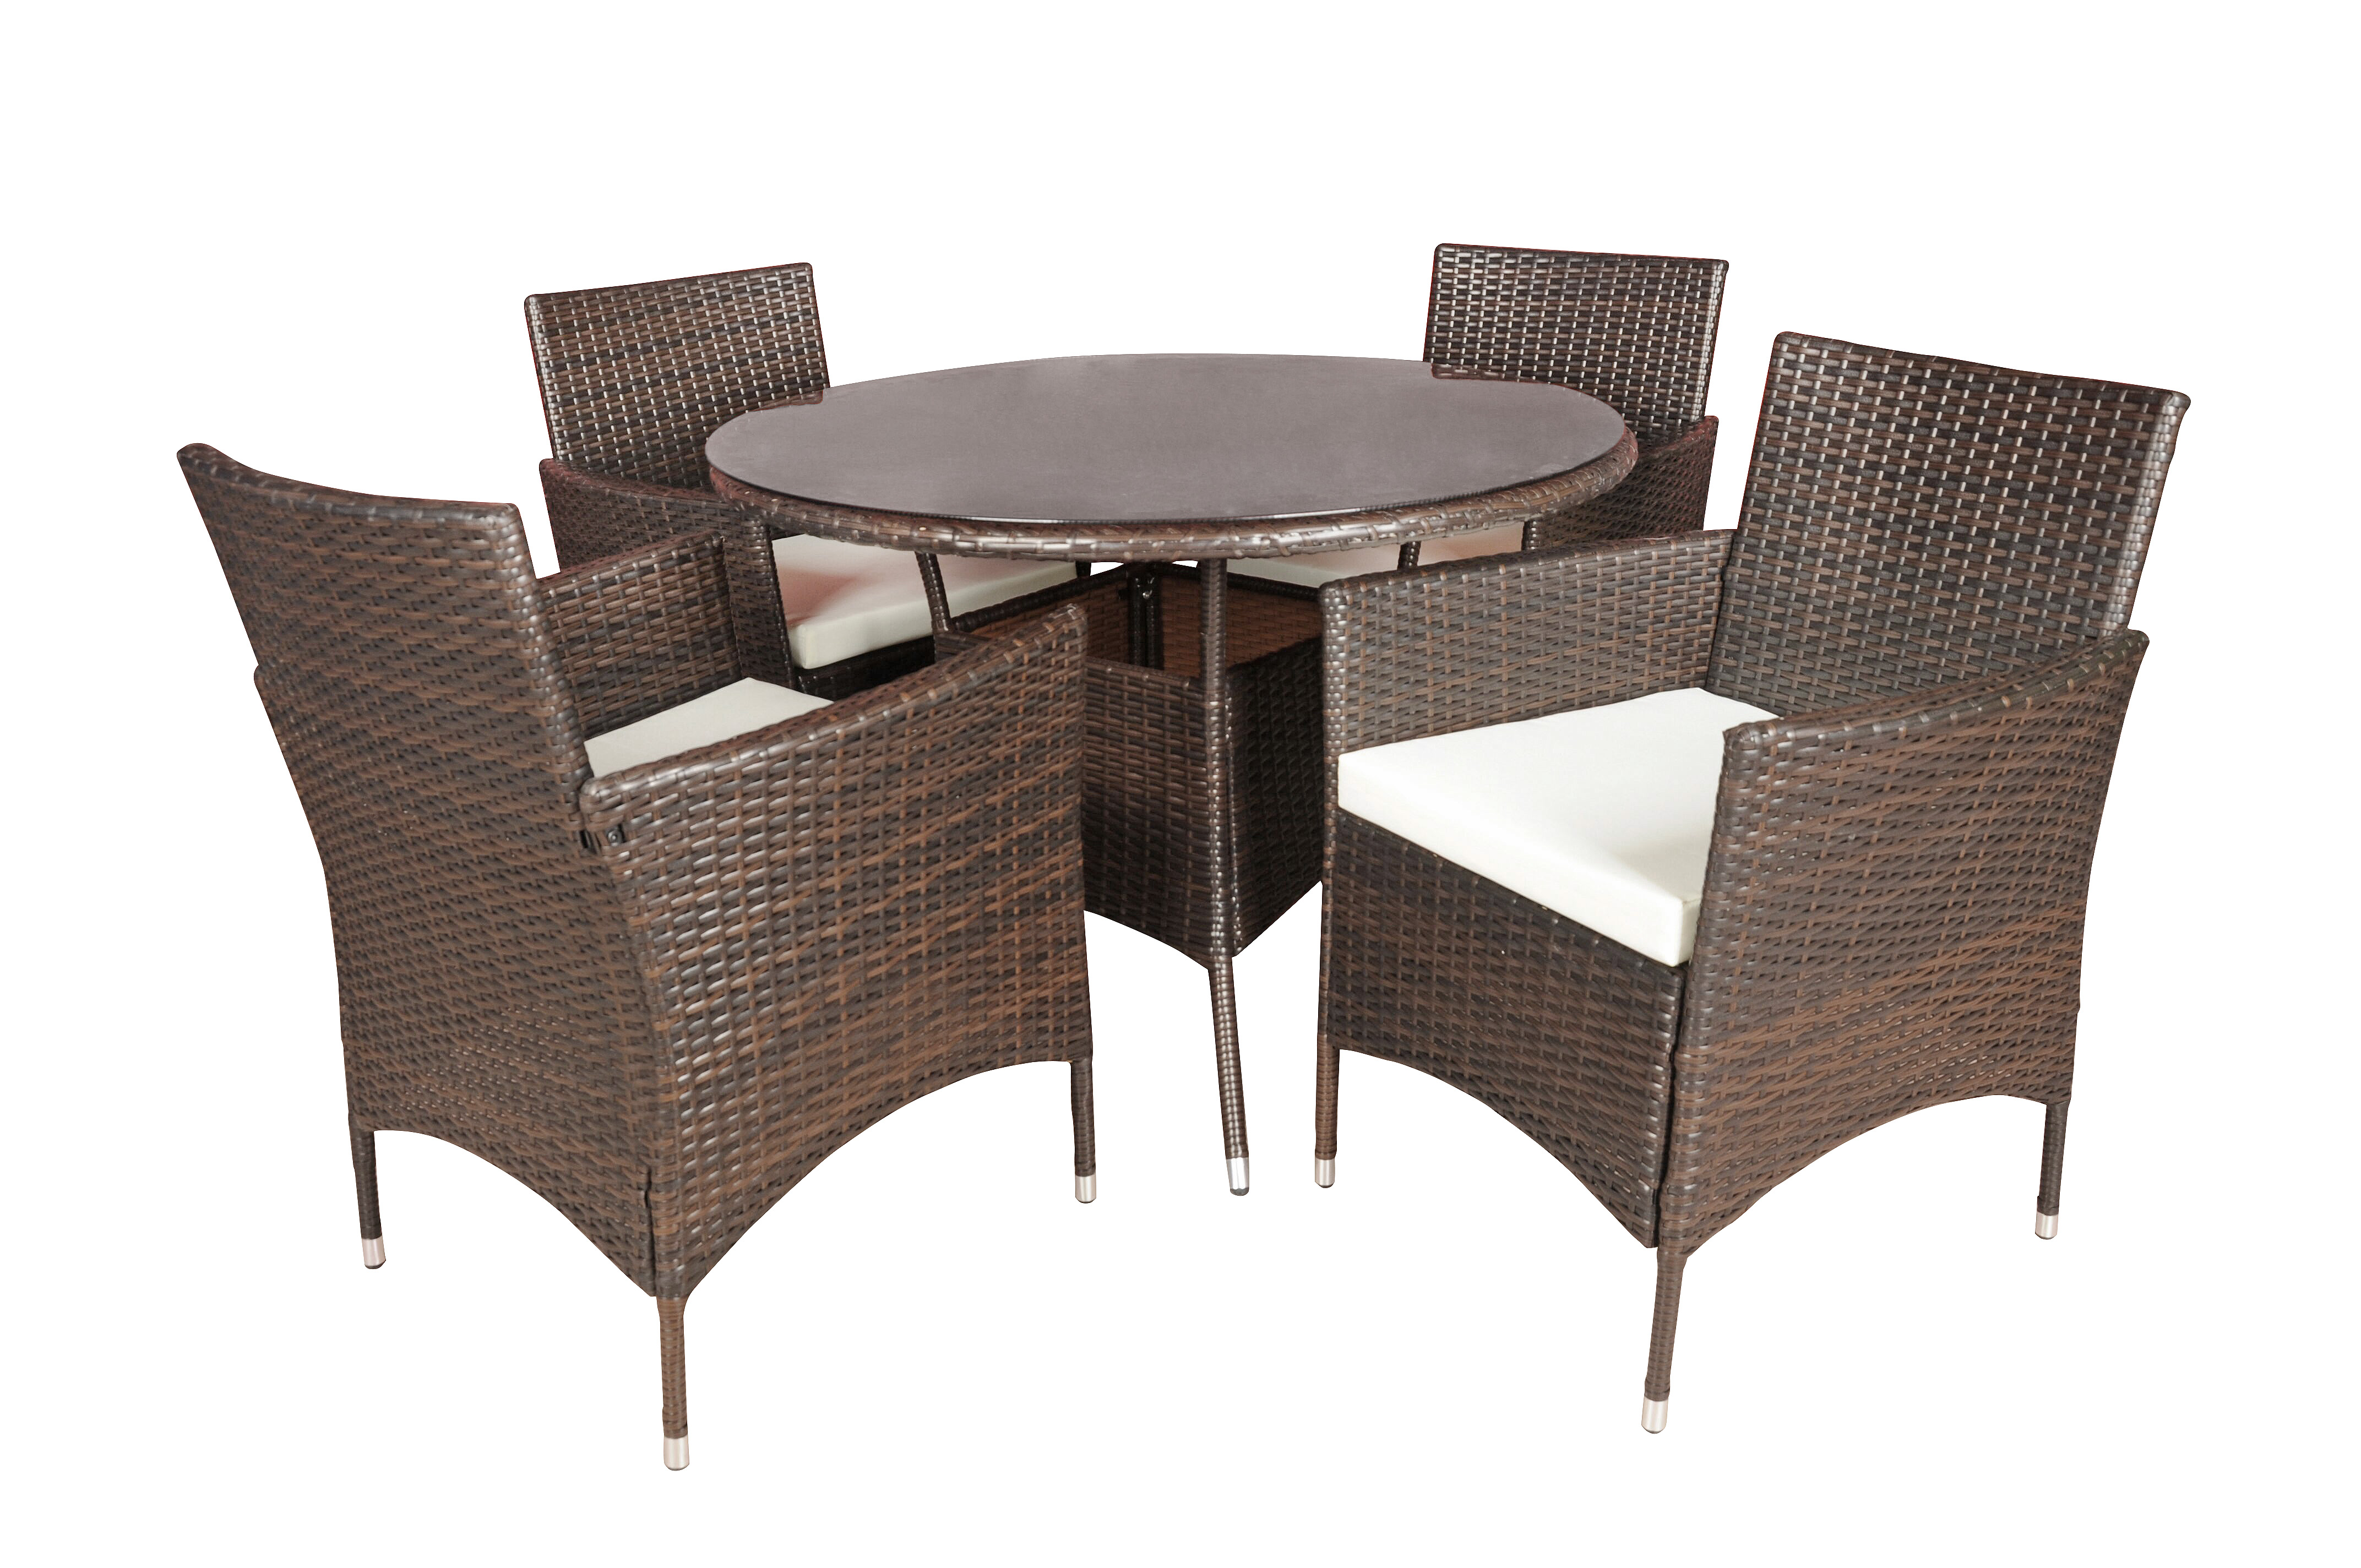 5 Piece Outdoor Patio Table and Chairs Dining Furniture Set, Rattan